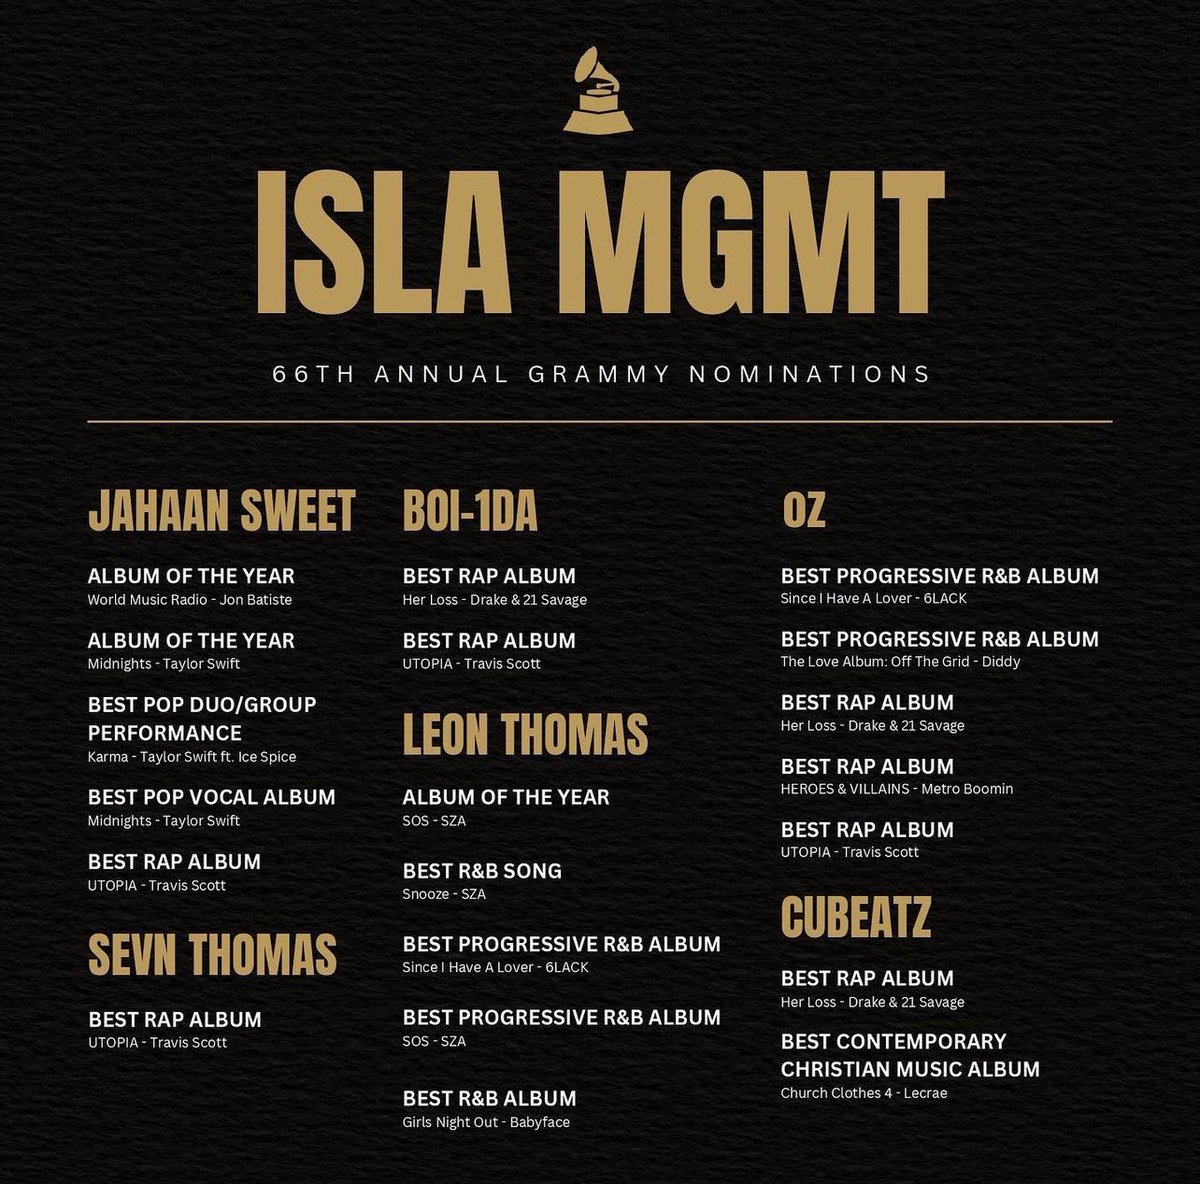 🙏🏾 Blessed to be apart of these nominated works. Shoutout the Isla gang and all the nominees this year 💫